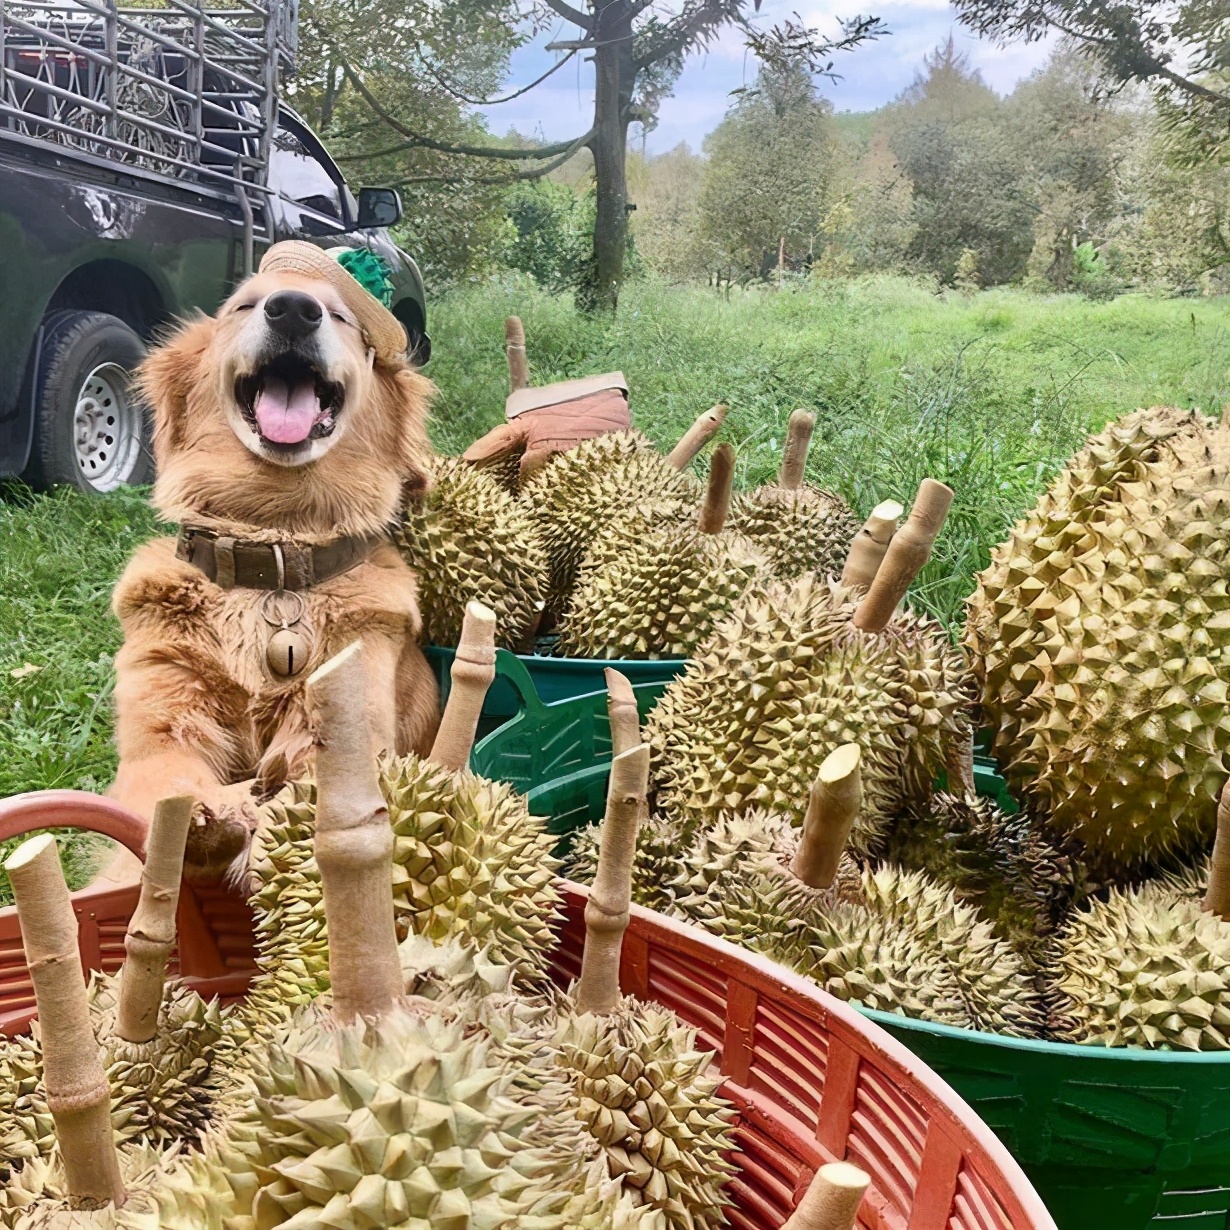 This smile has helped the owner of the durian seller to 'run' more.